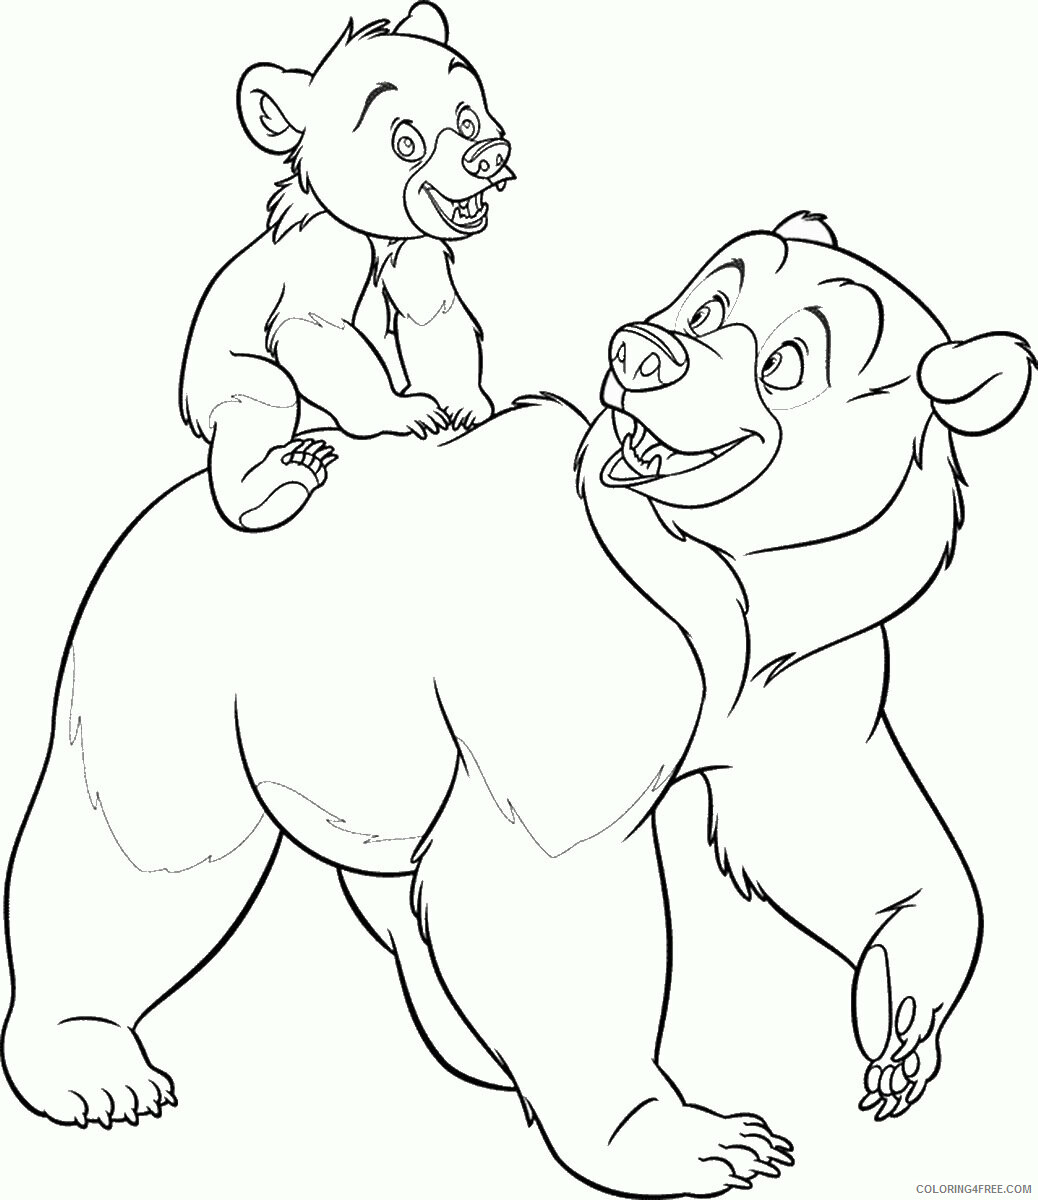 Bear Coloring Pages Animal Printable Sheets bear_cl_04 2021 0253 Coloring4free